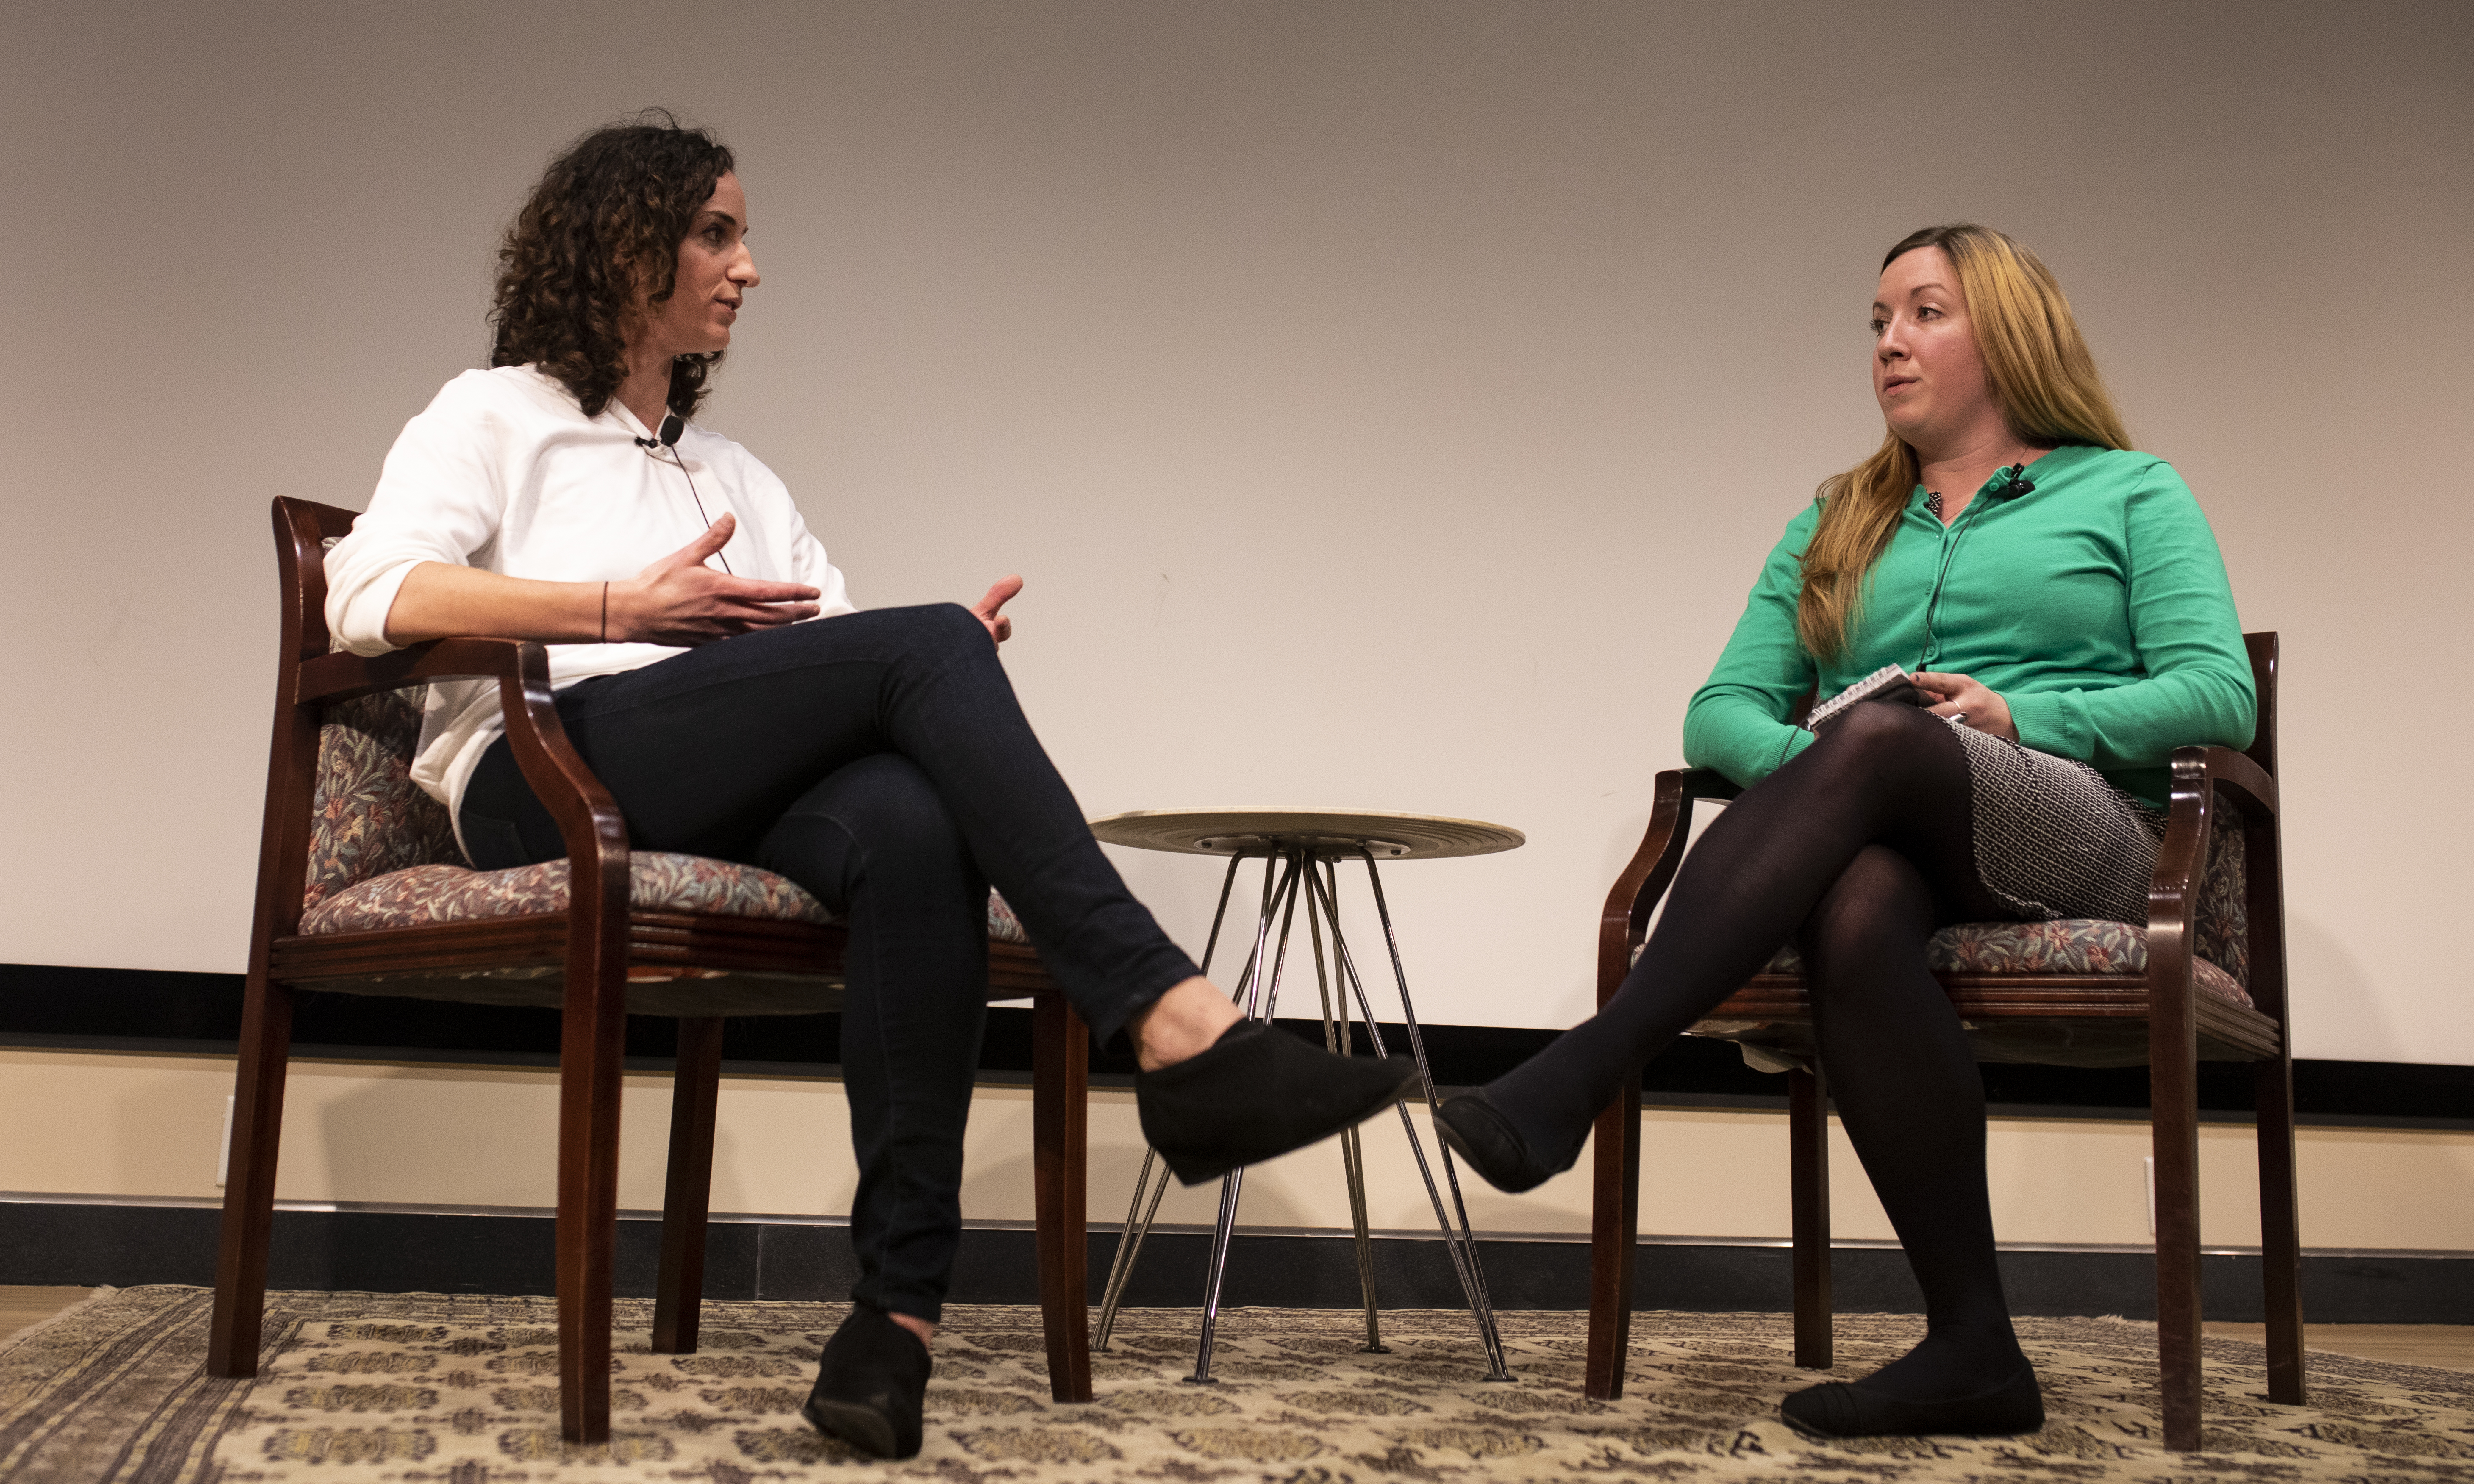 The Washington Post Director of Audio Jessica Stahl , The Dallas Morning News Innovation Lecture Series Speaker speaking on stage with Ph.D fellow Kelsey Whipple